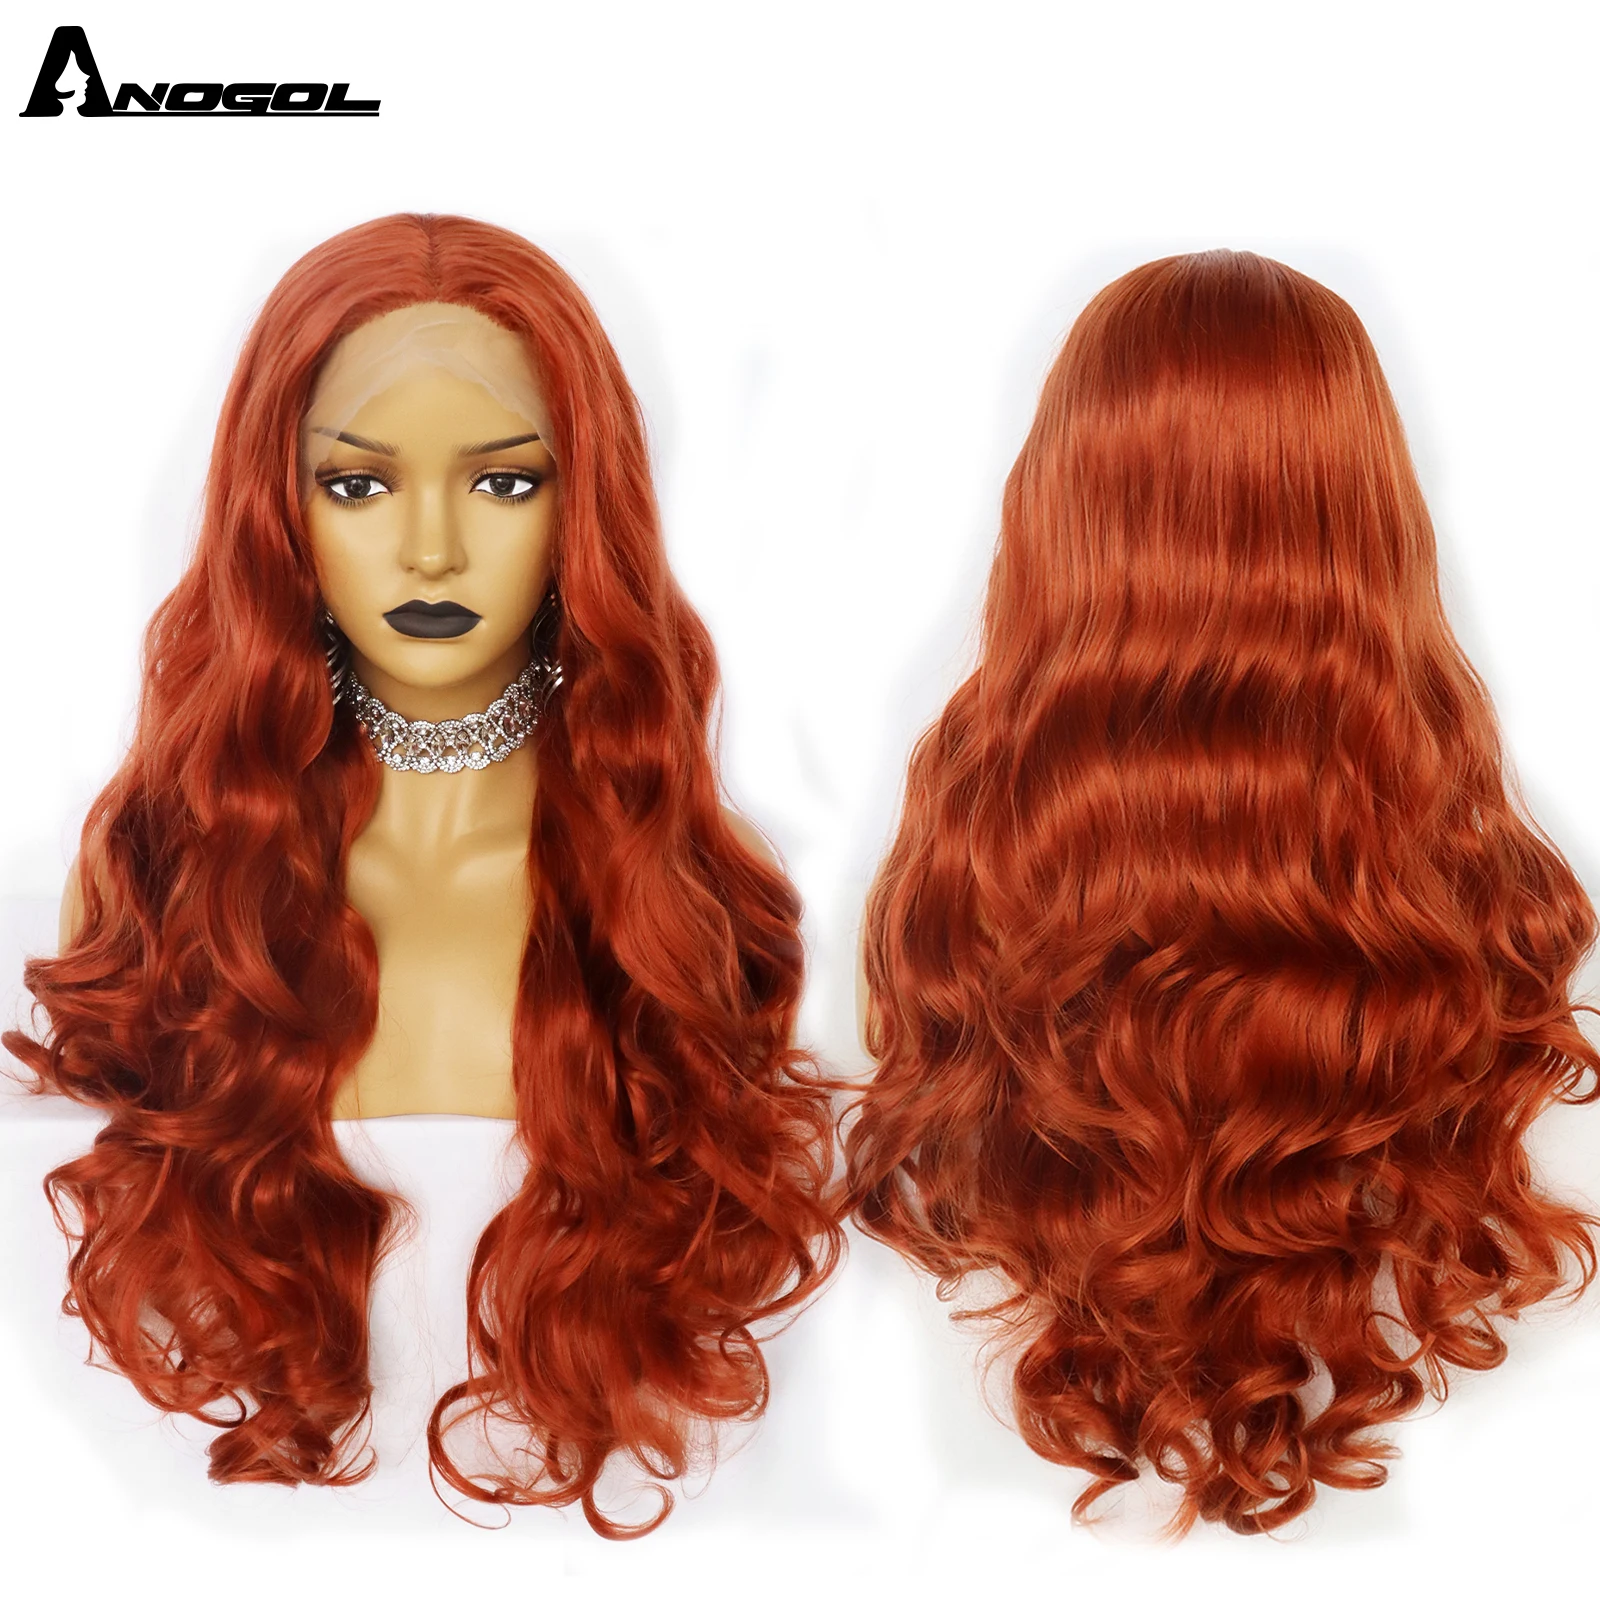 Anogol 13*1 Part Lace Front Wig High Temperature Fiber Orange Long Wave Copper Red Synthetic Lace Part Wig Hair For Women